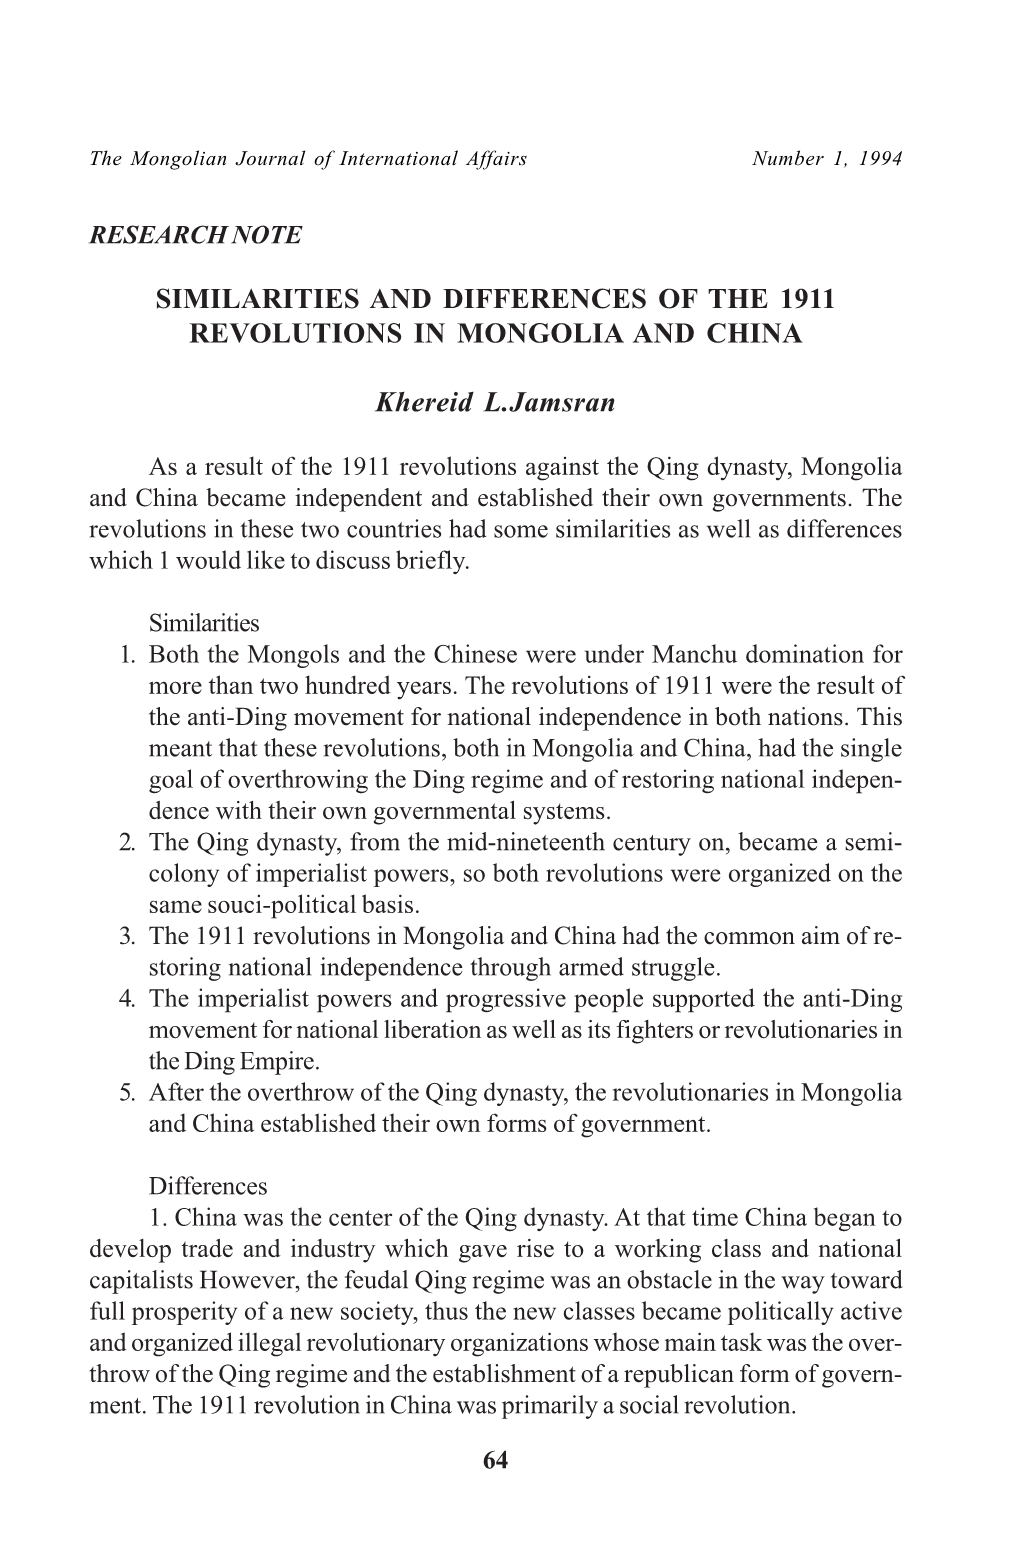 Similarities and Differences of the 1911 Revolutions in Mongolia and China